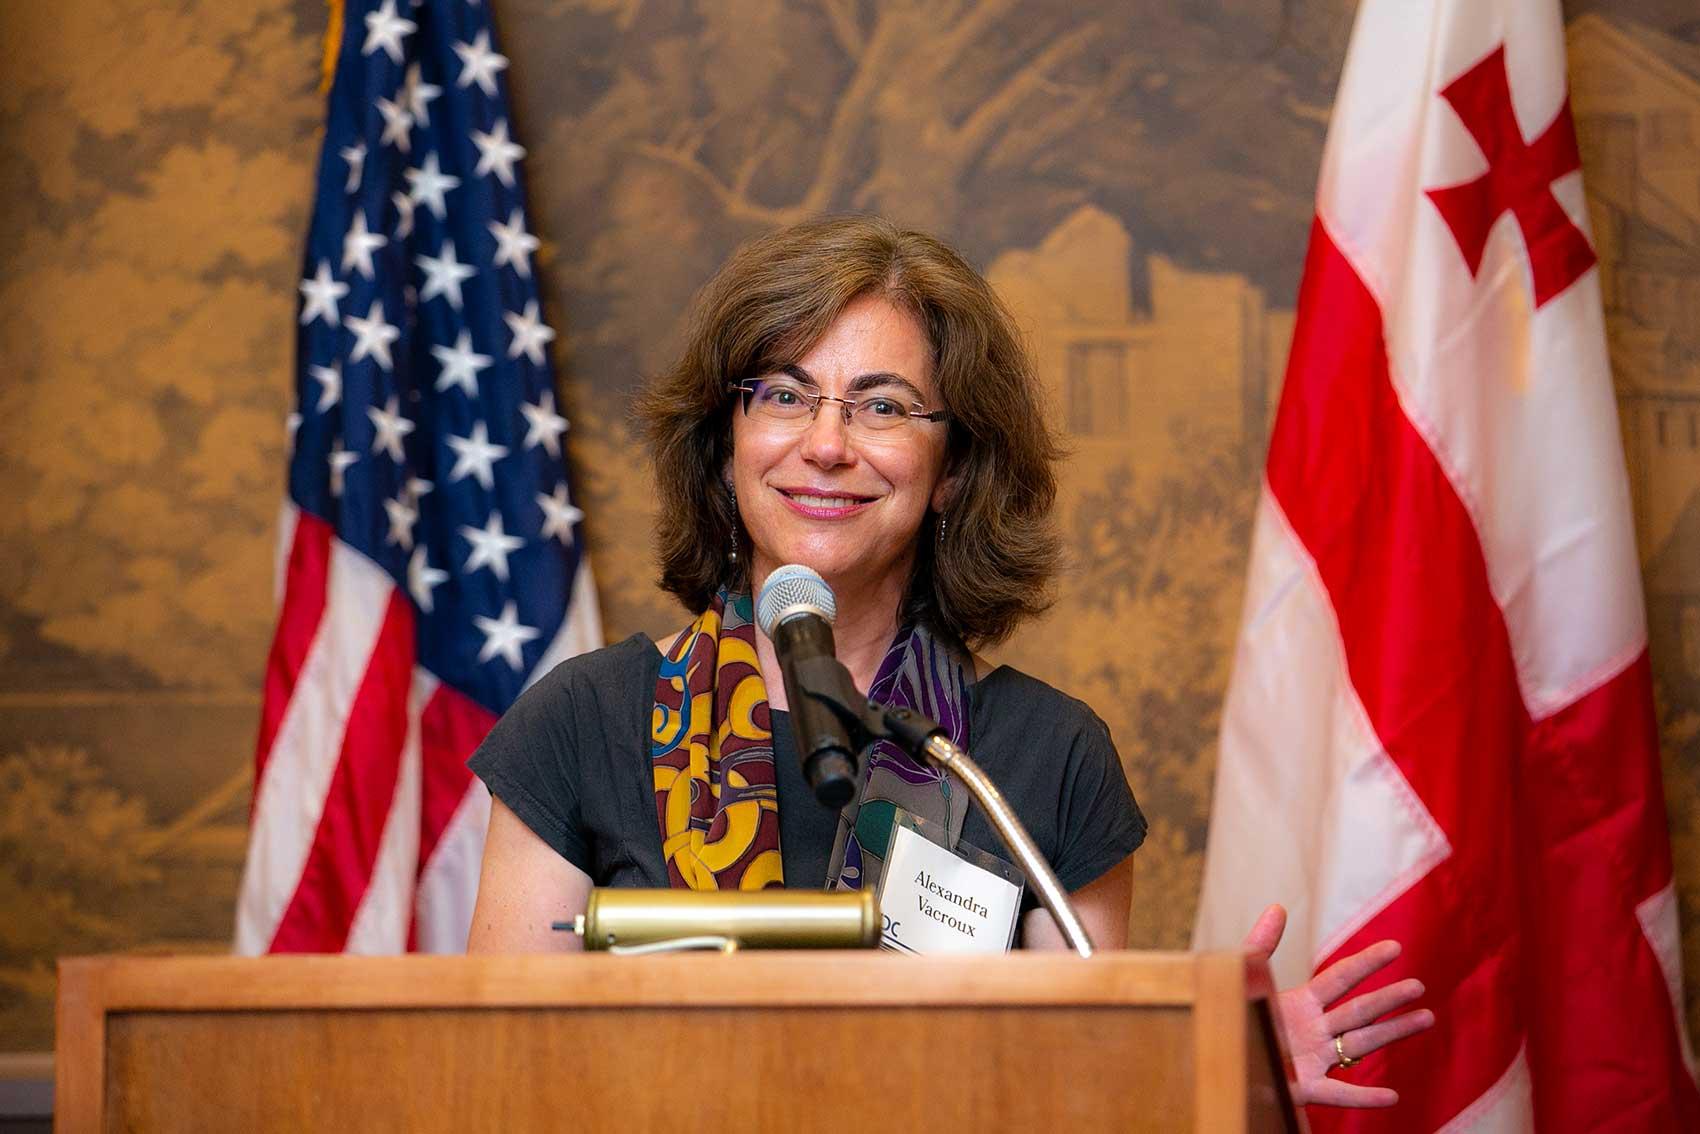 Alexandra Vacroux speaking at podium with U.S. and Georgian flags in background